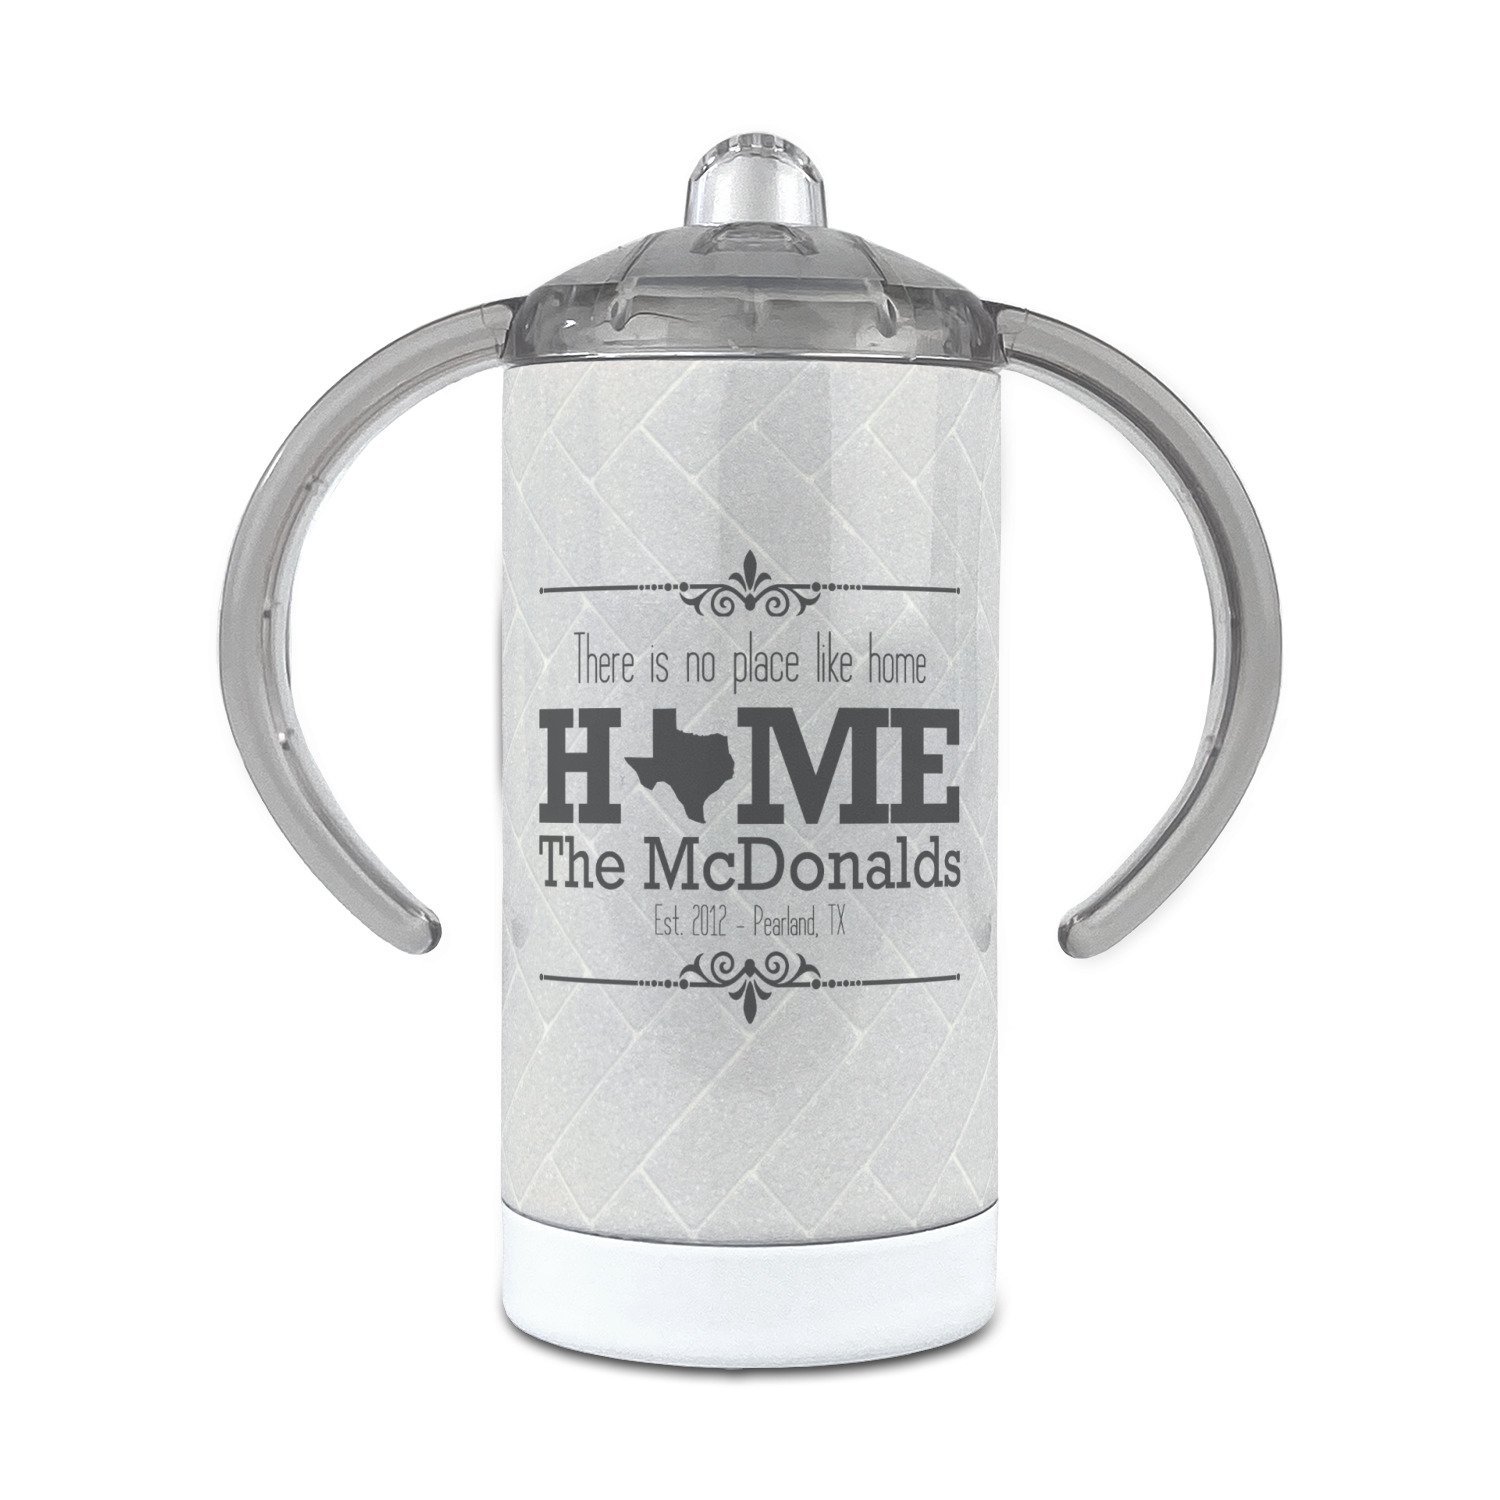 https://www.youcustomizeit.com/common/MAKE/1767911/Home-State-12-oz-Stainless-Steel-Sippy-Cups-FRONT.jpg?lm=1671174289